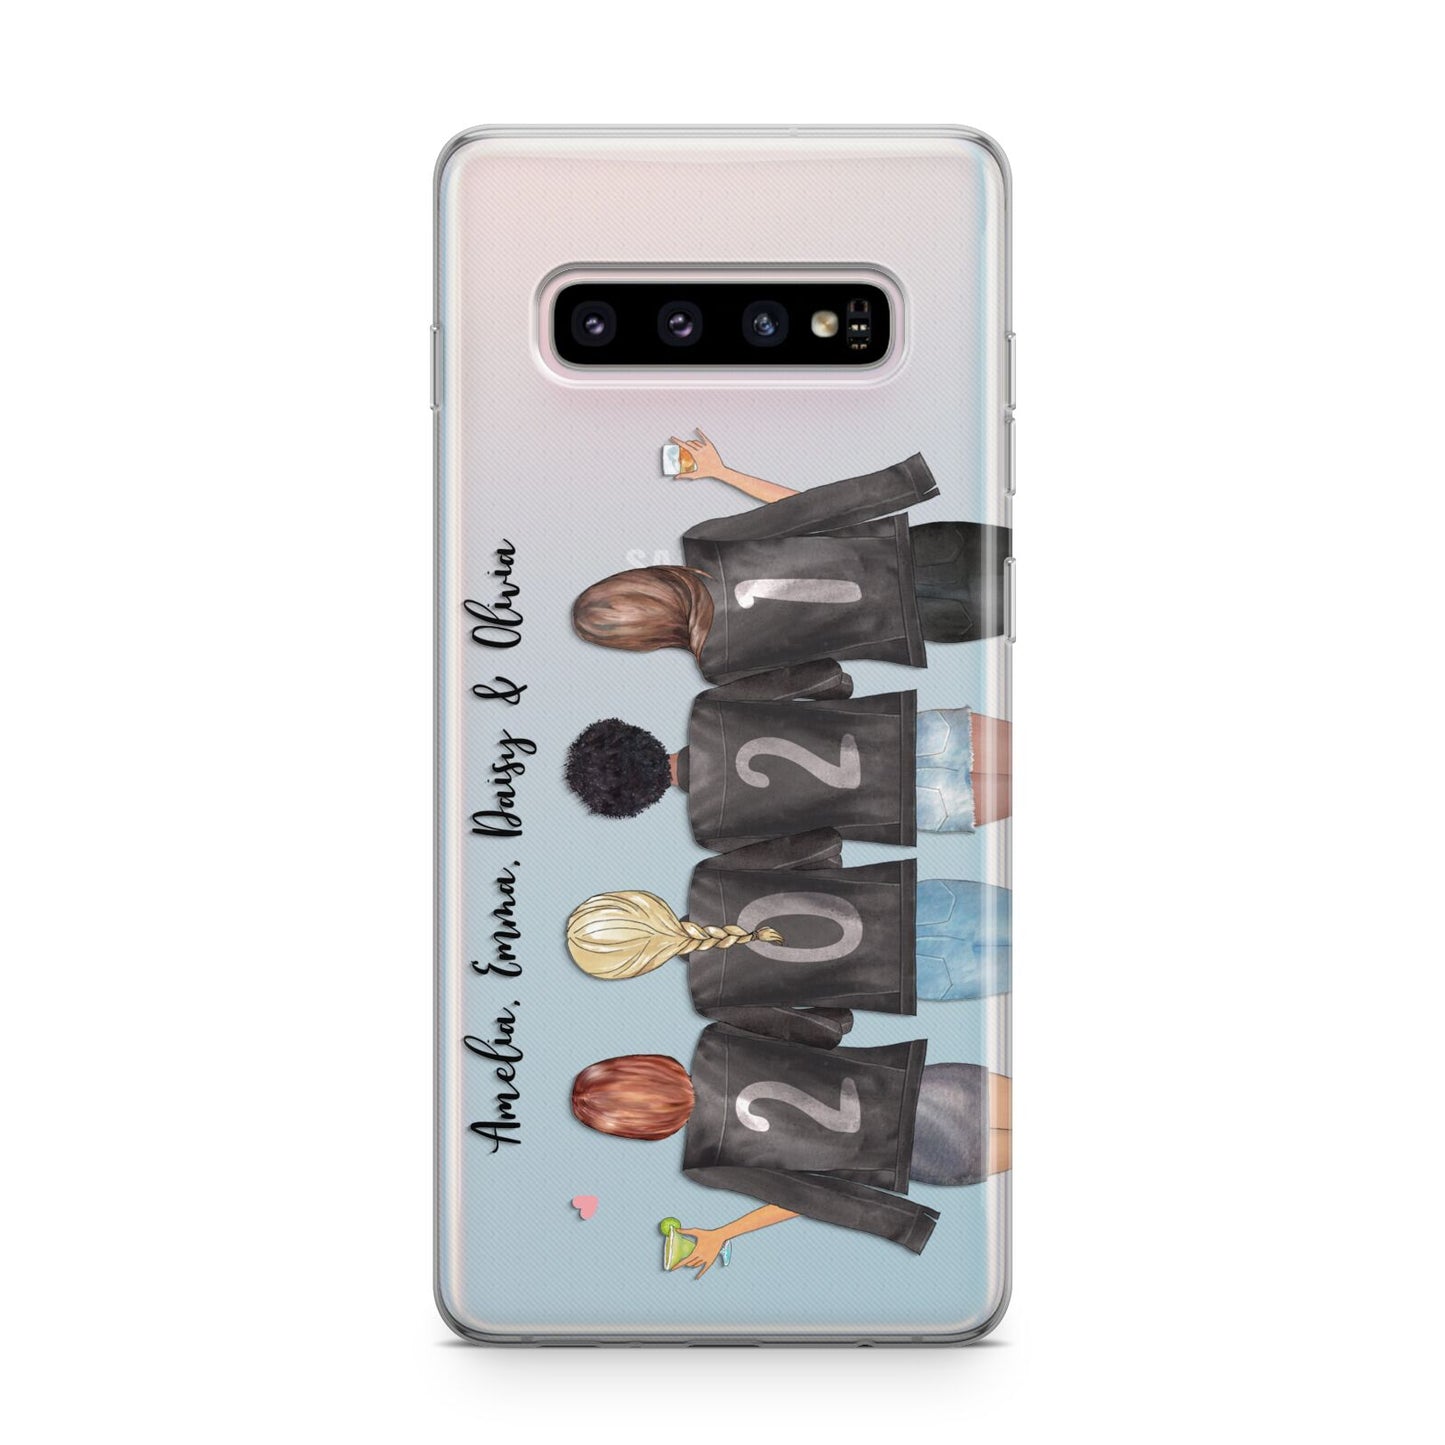 4 Best Friends with Names Samsung Galaxy S10 Plus Case